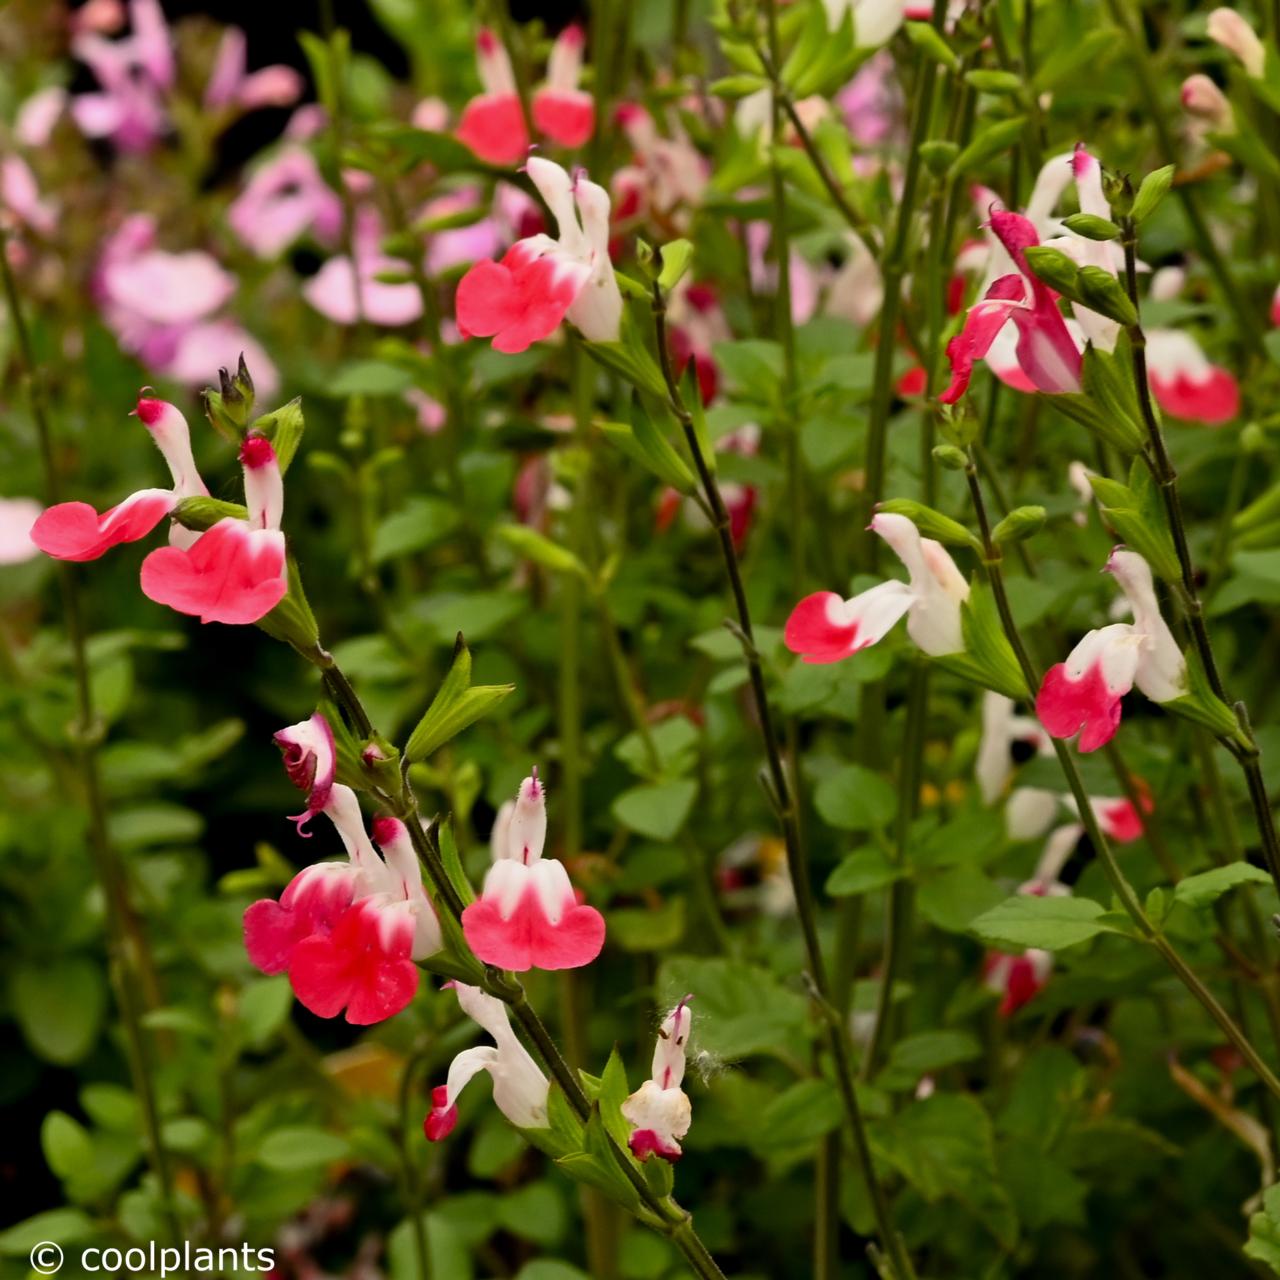 Salvia microphylla 'Hot Lips' plant